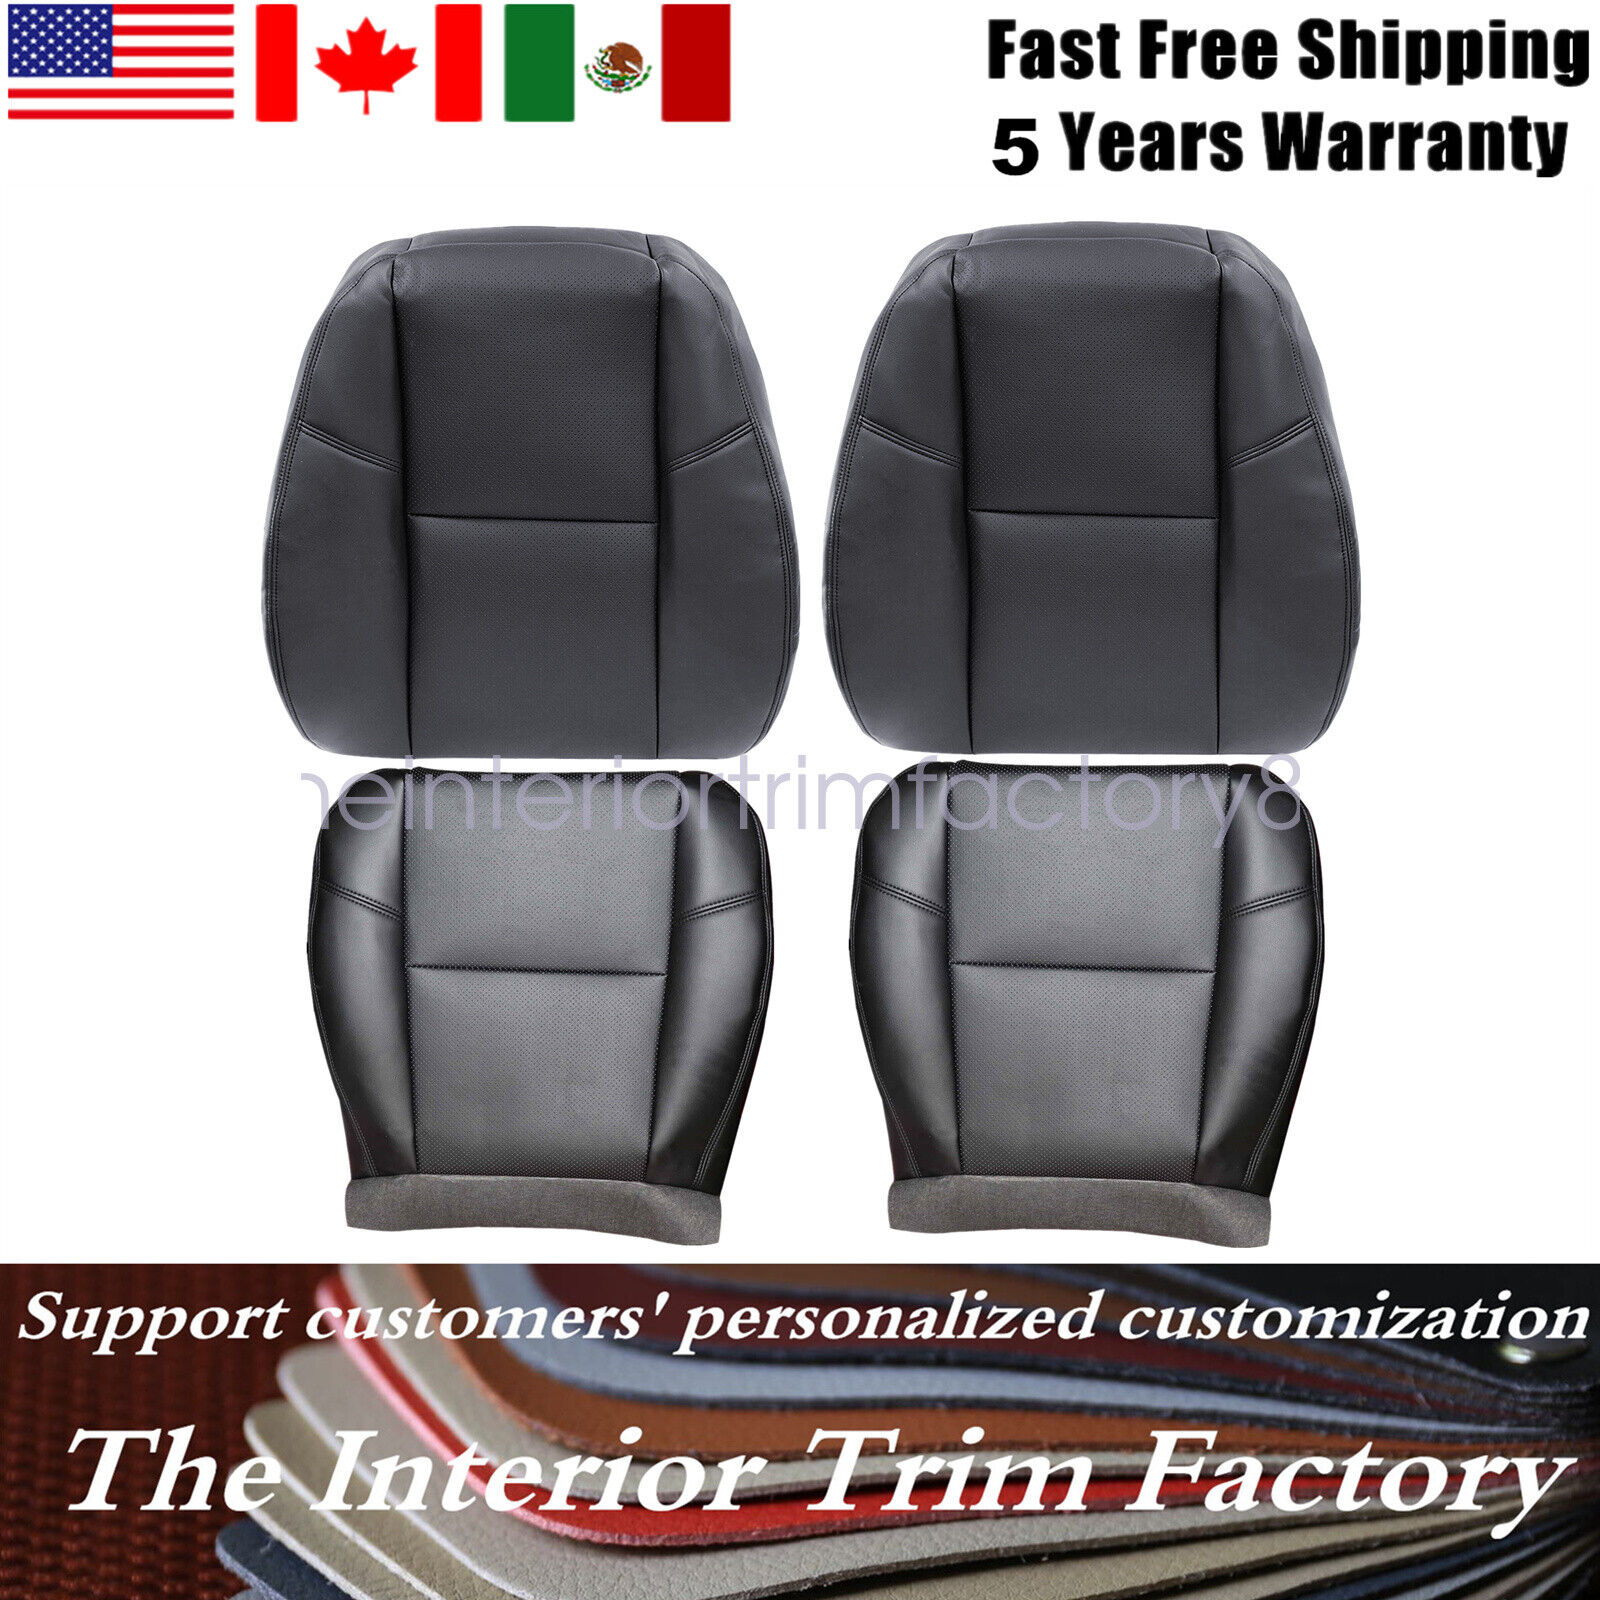 Fits 2007-2014 Cadillac Escalade Leather Seat Cover Black Both Side Bottom & Top